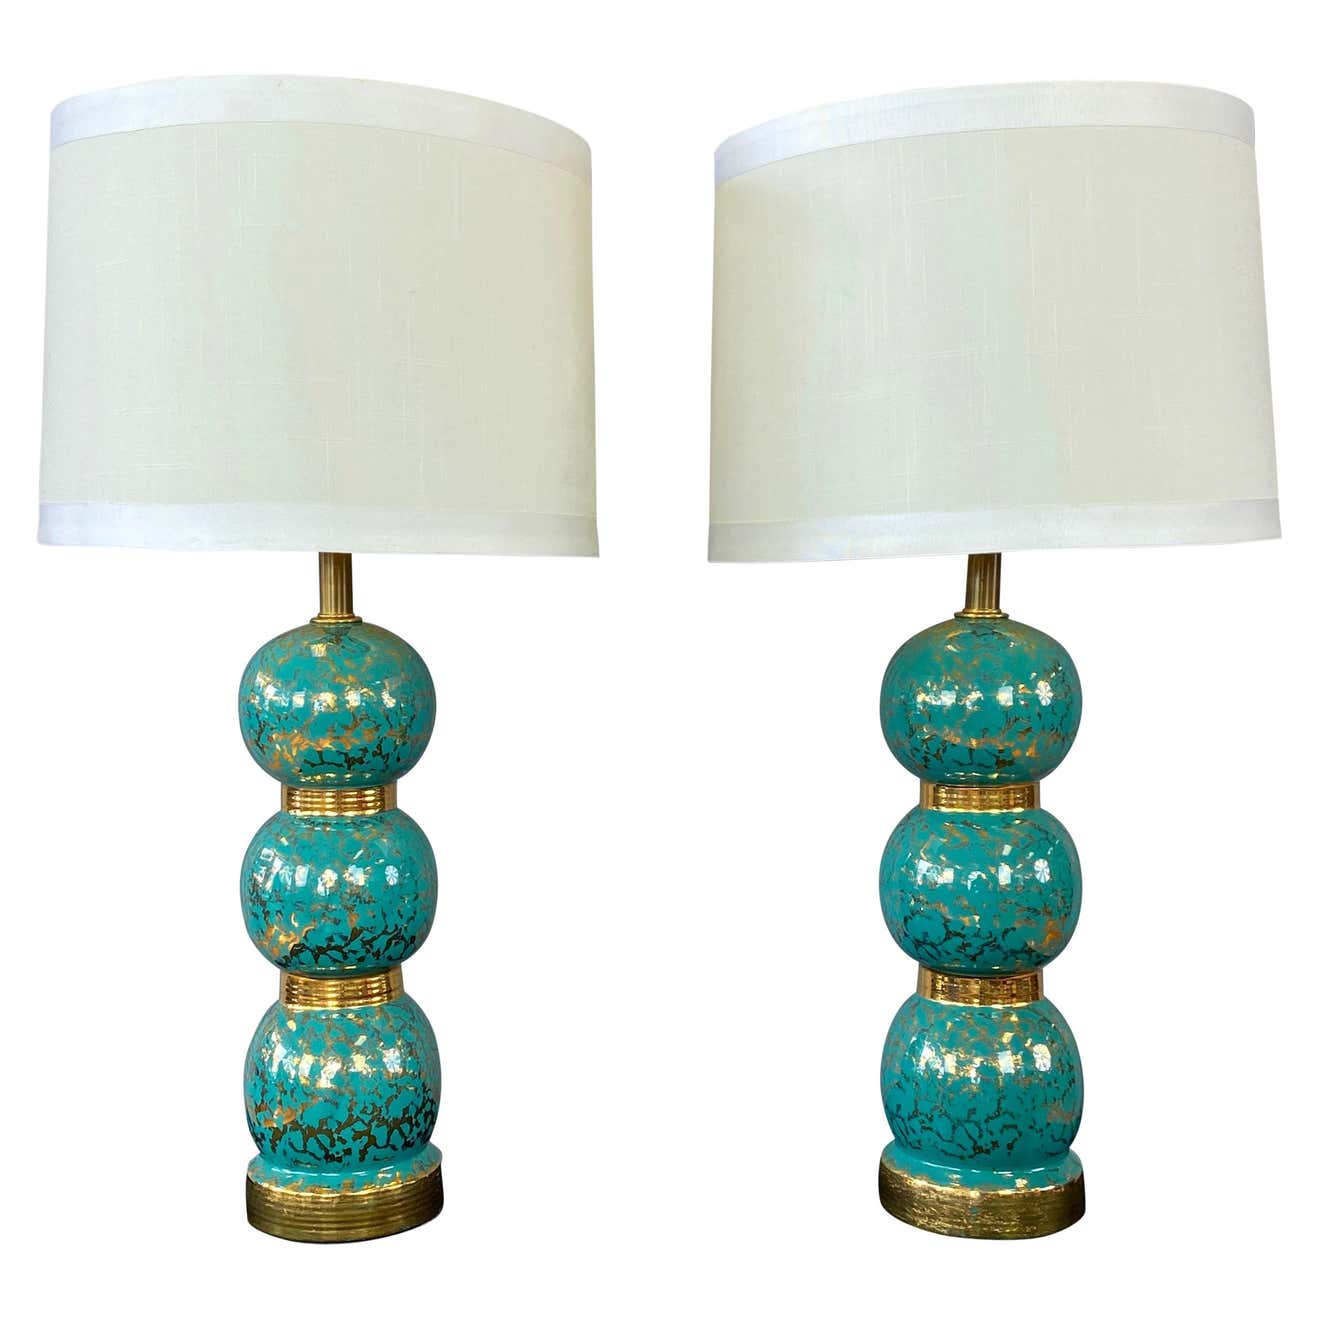 Pair Of Turquoise And Gold Ceramic, Ball Shaped Table Lamps